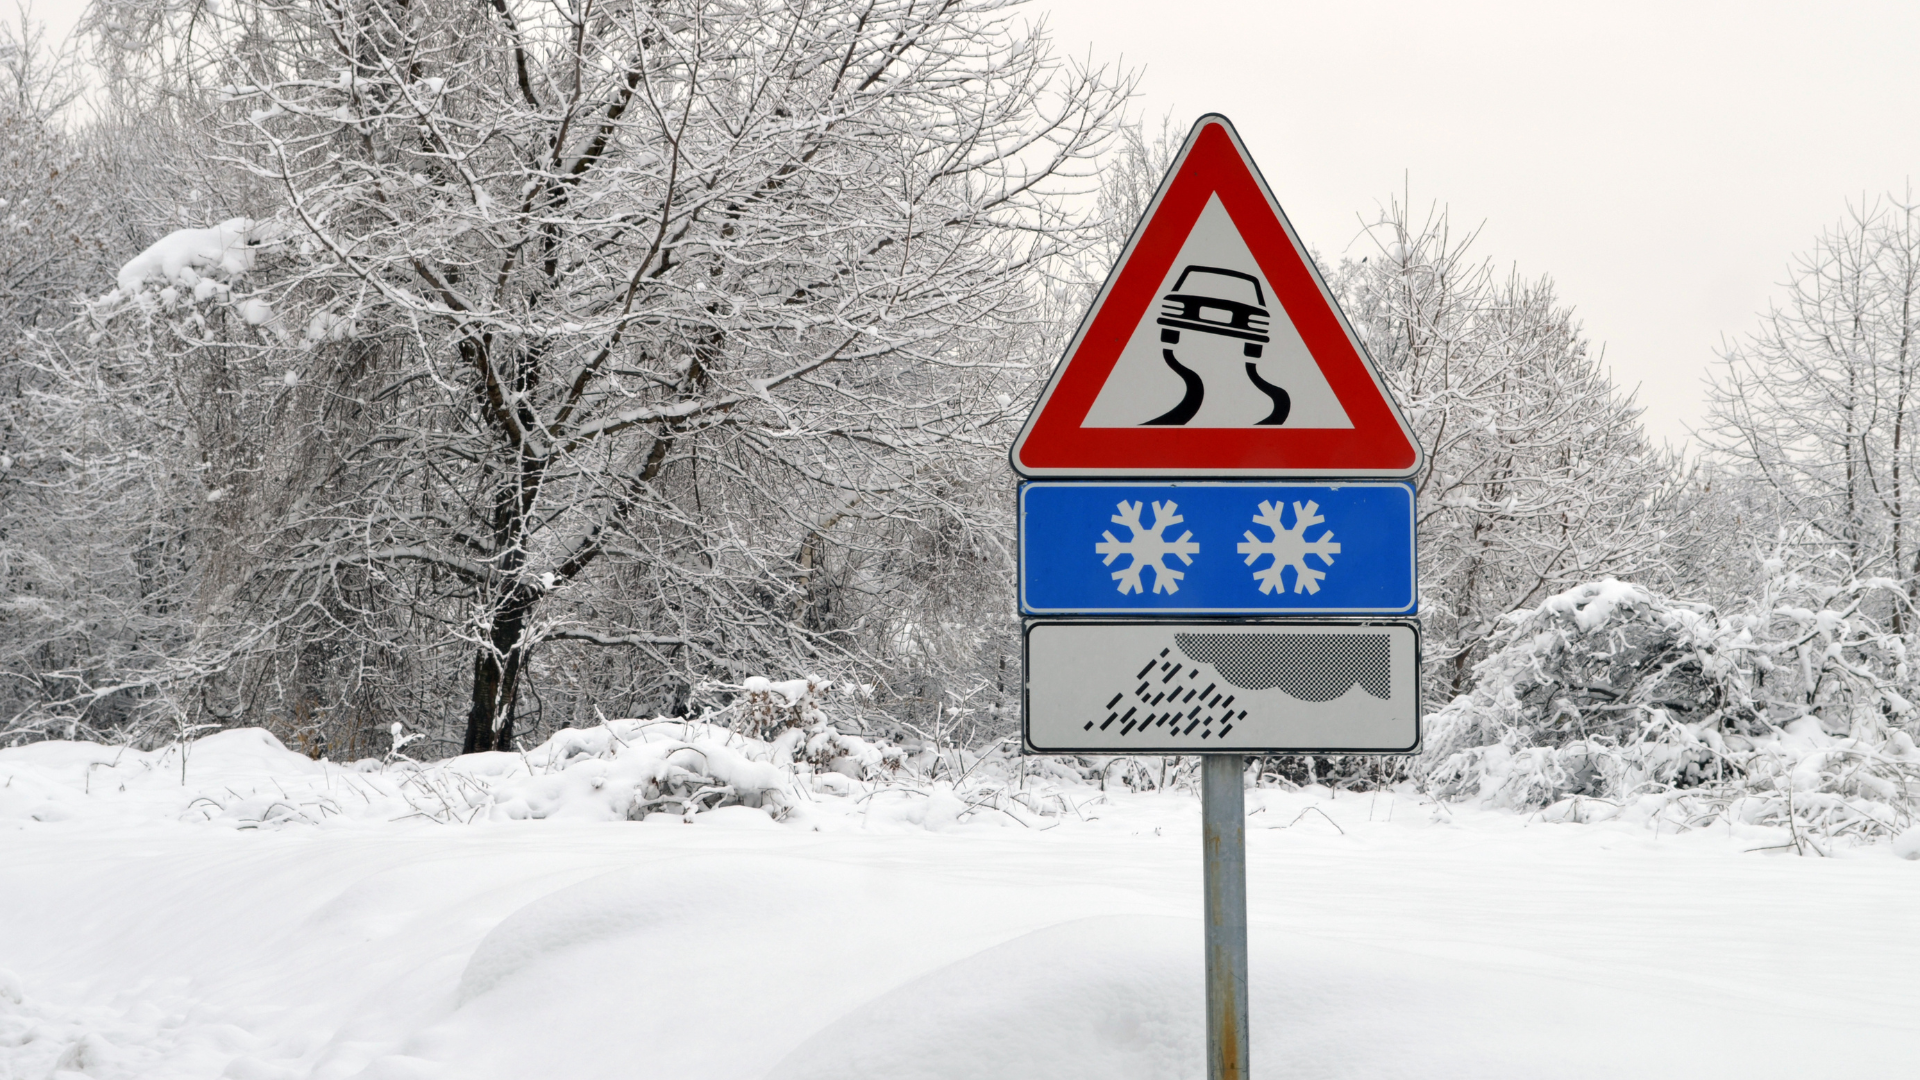 slippery road sign with snow and rain